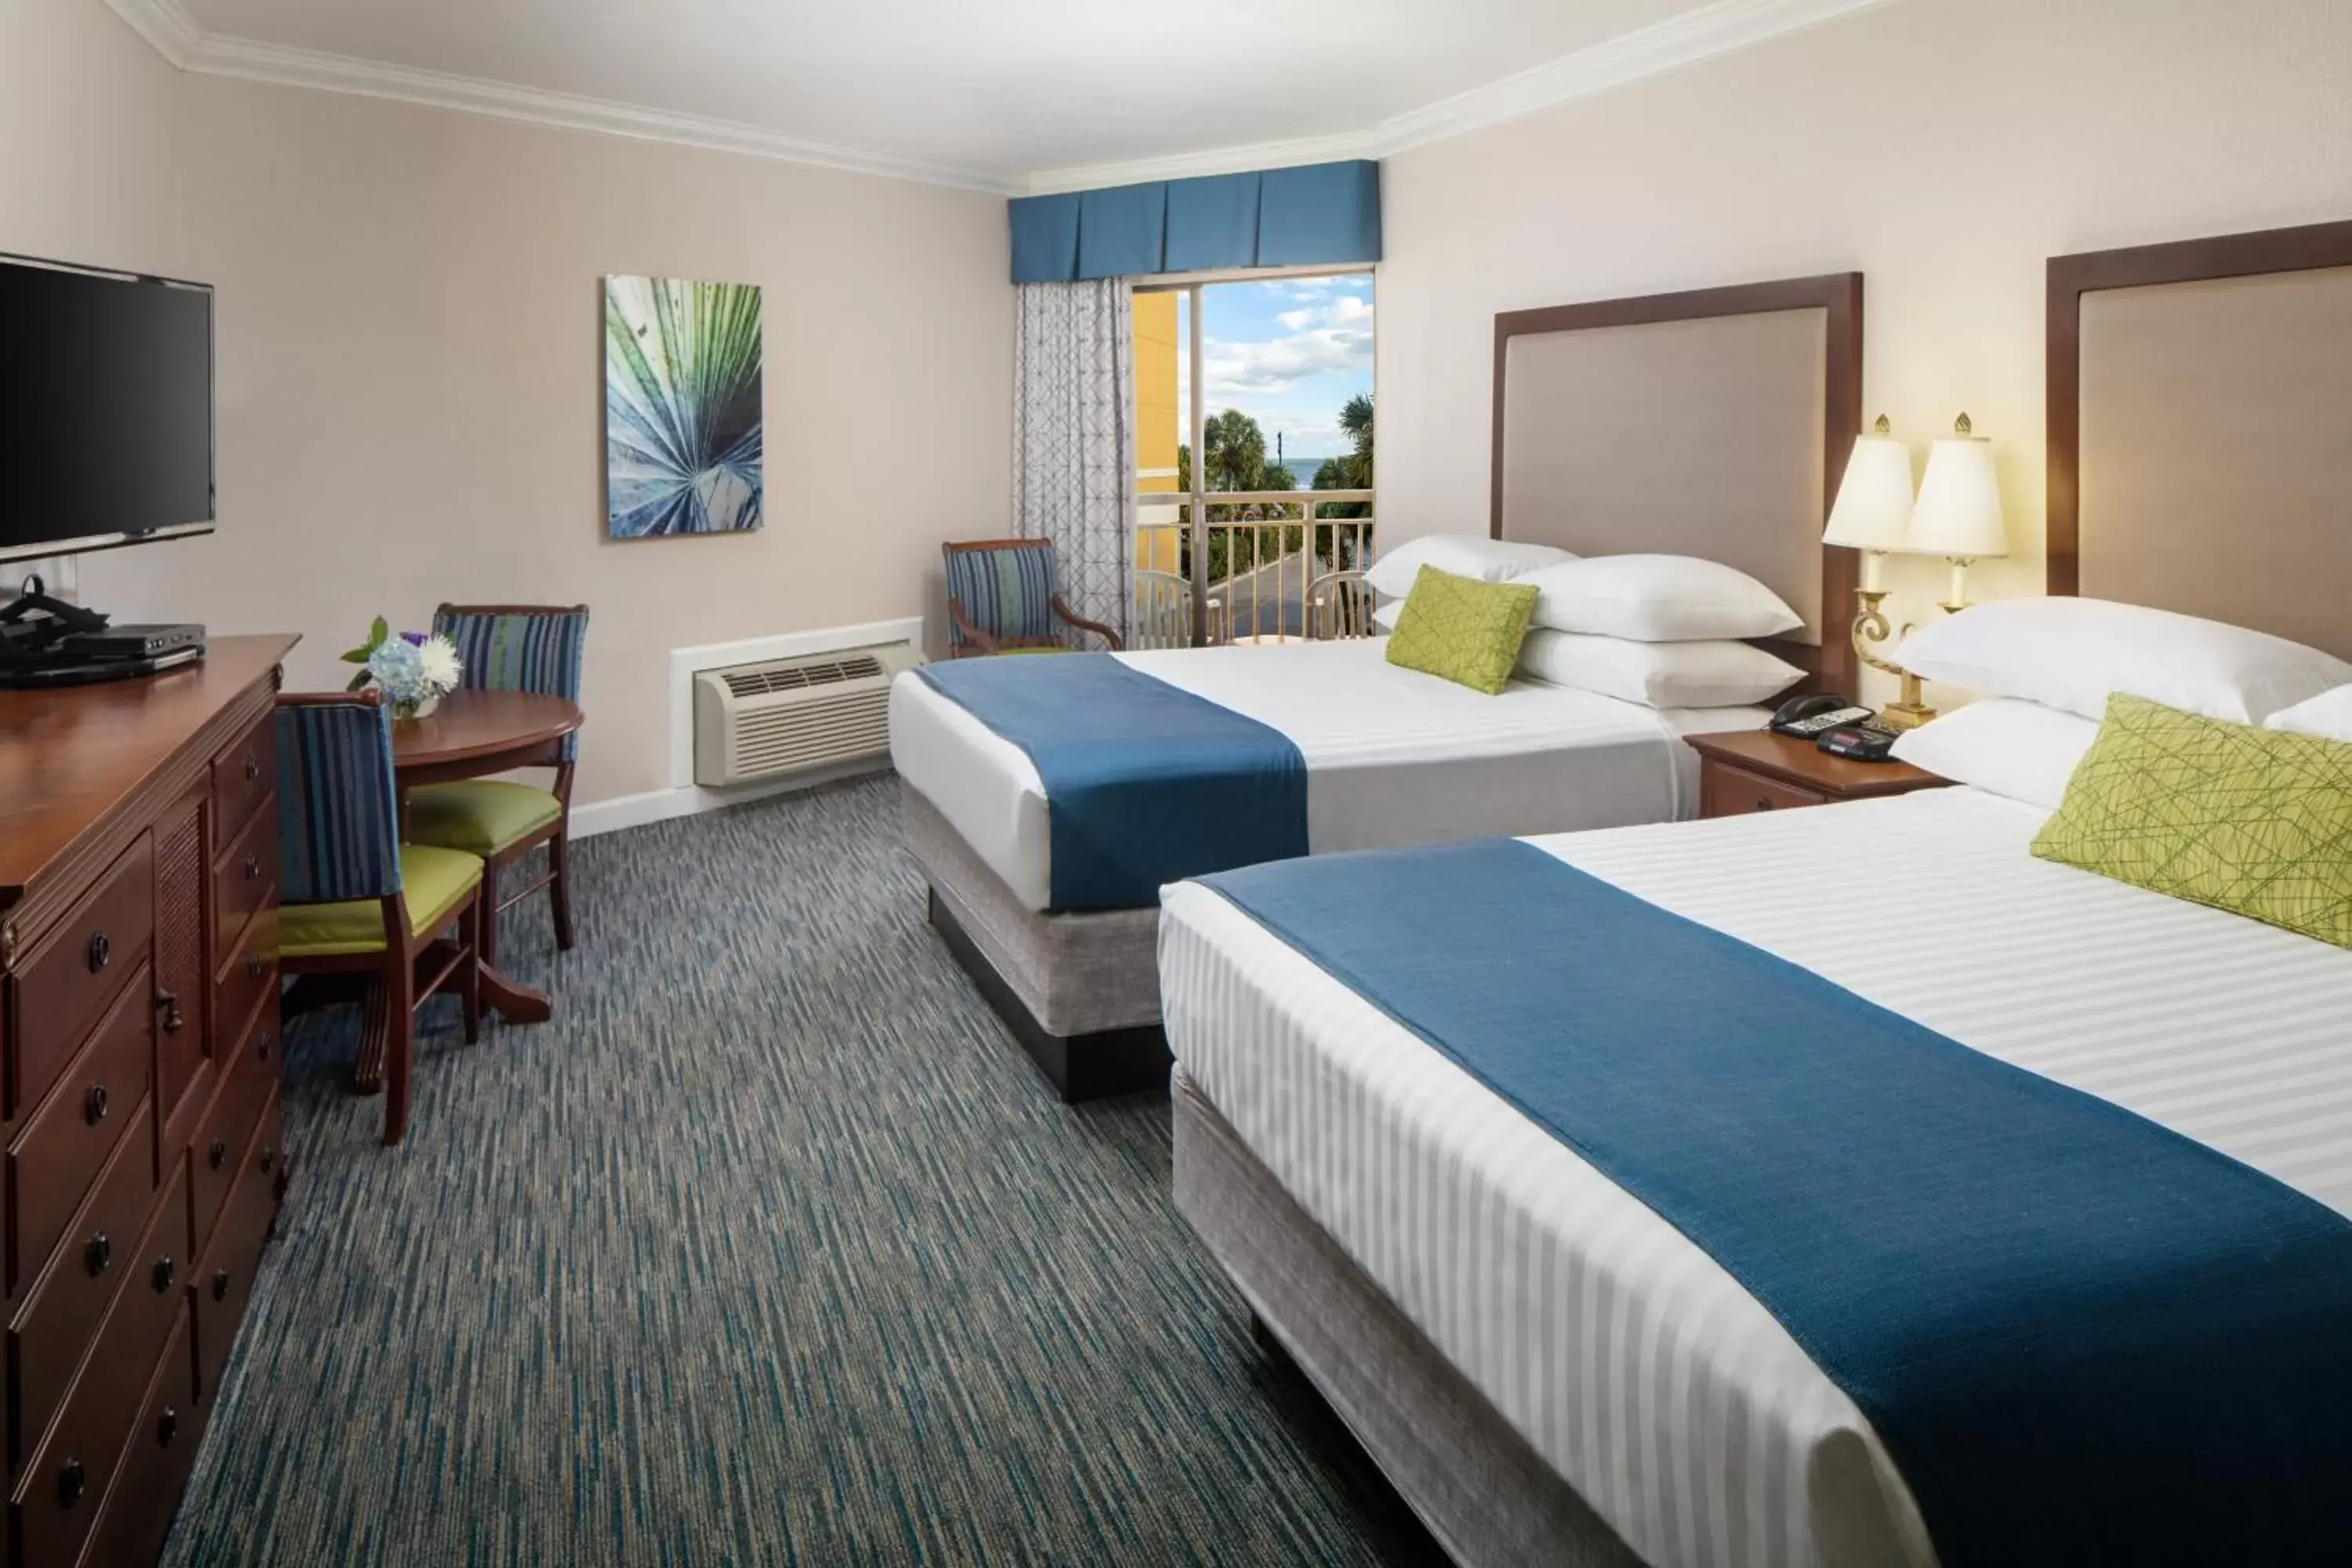 Bedroom in Holiday Inn At the Pavilion - Independent